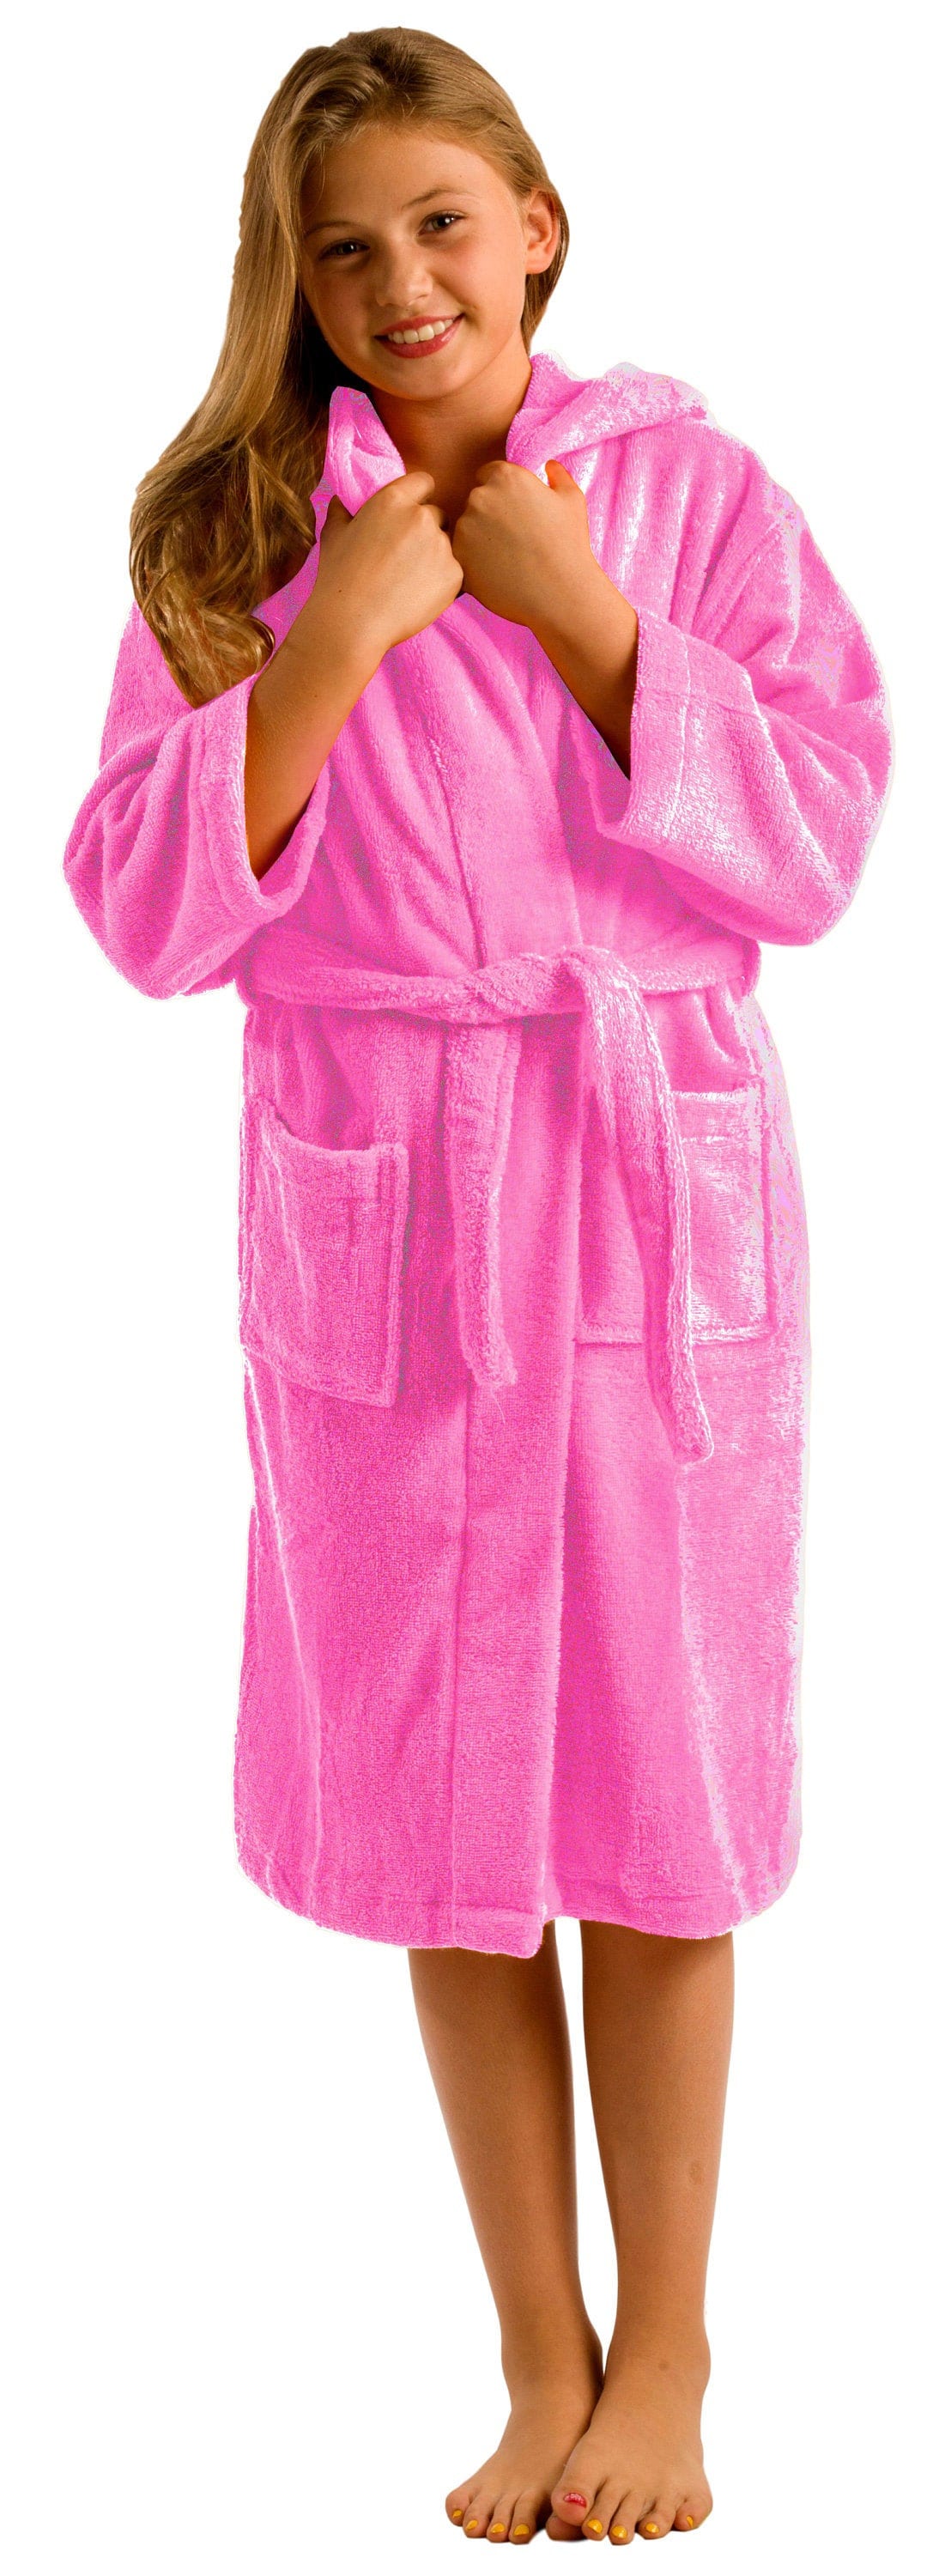 andrea haglund recommends bath robes for teens pic